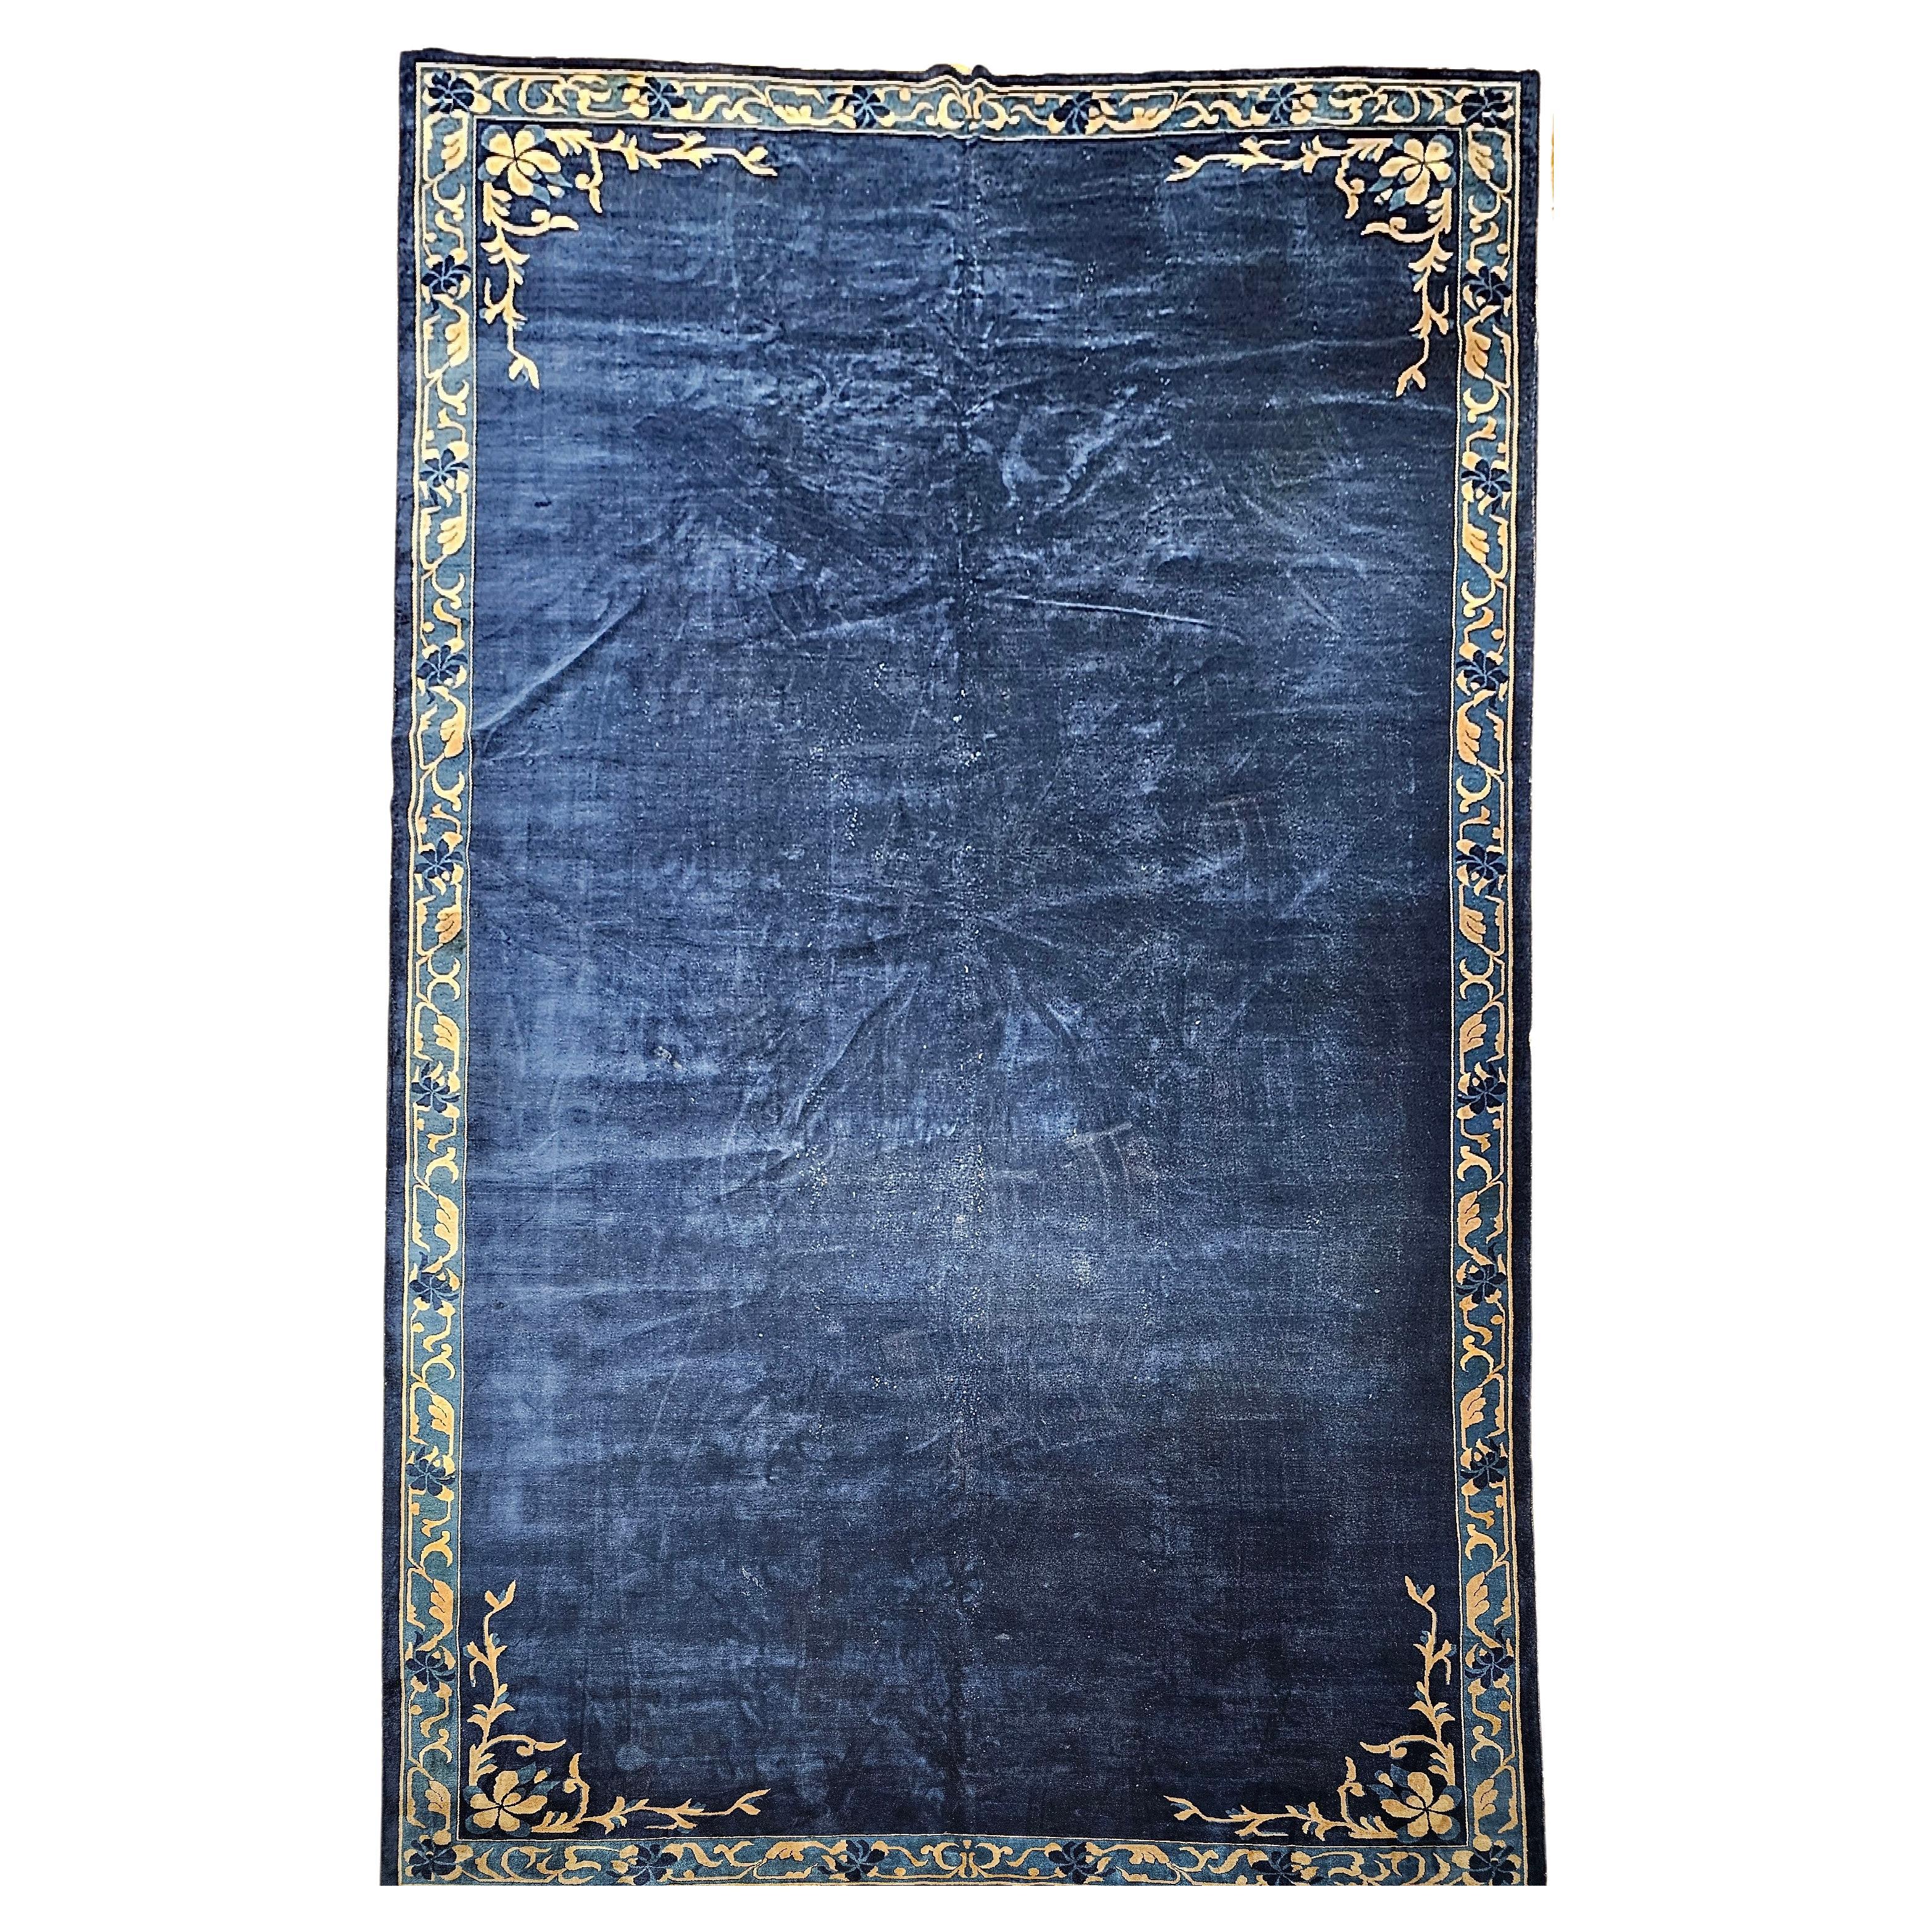 Oversize Art Deco Chinese Rug in Open Field Design in Navy, Gold, Baby Blue